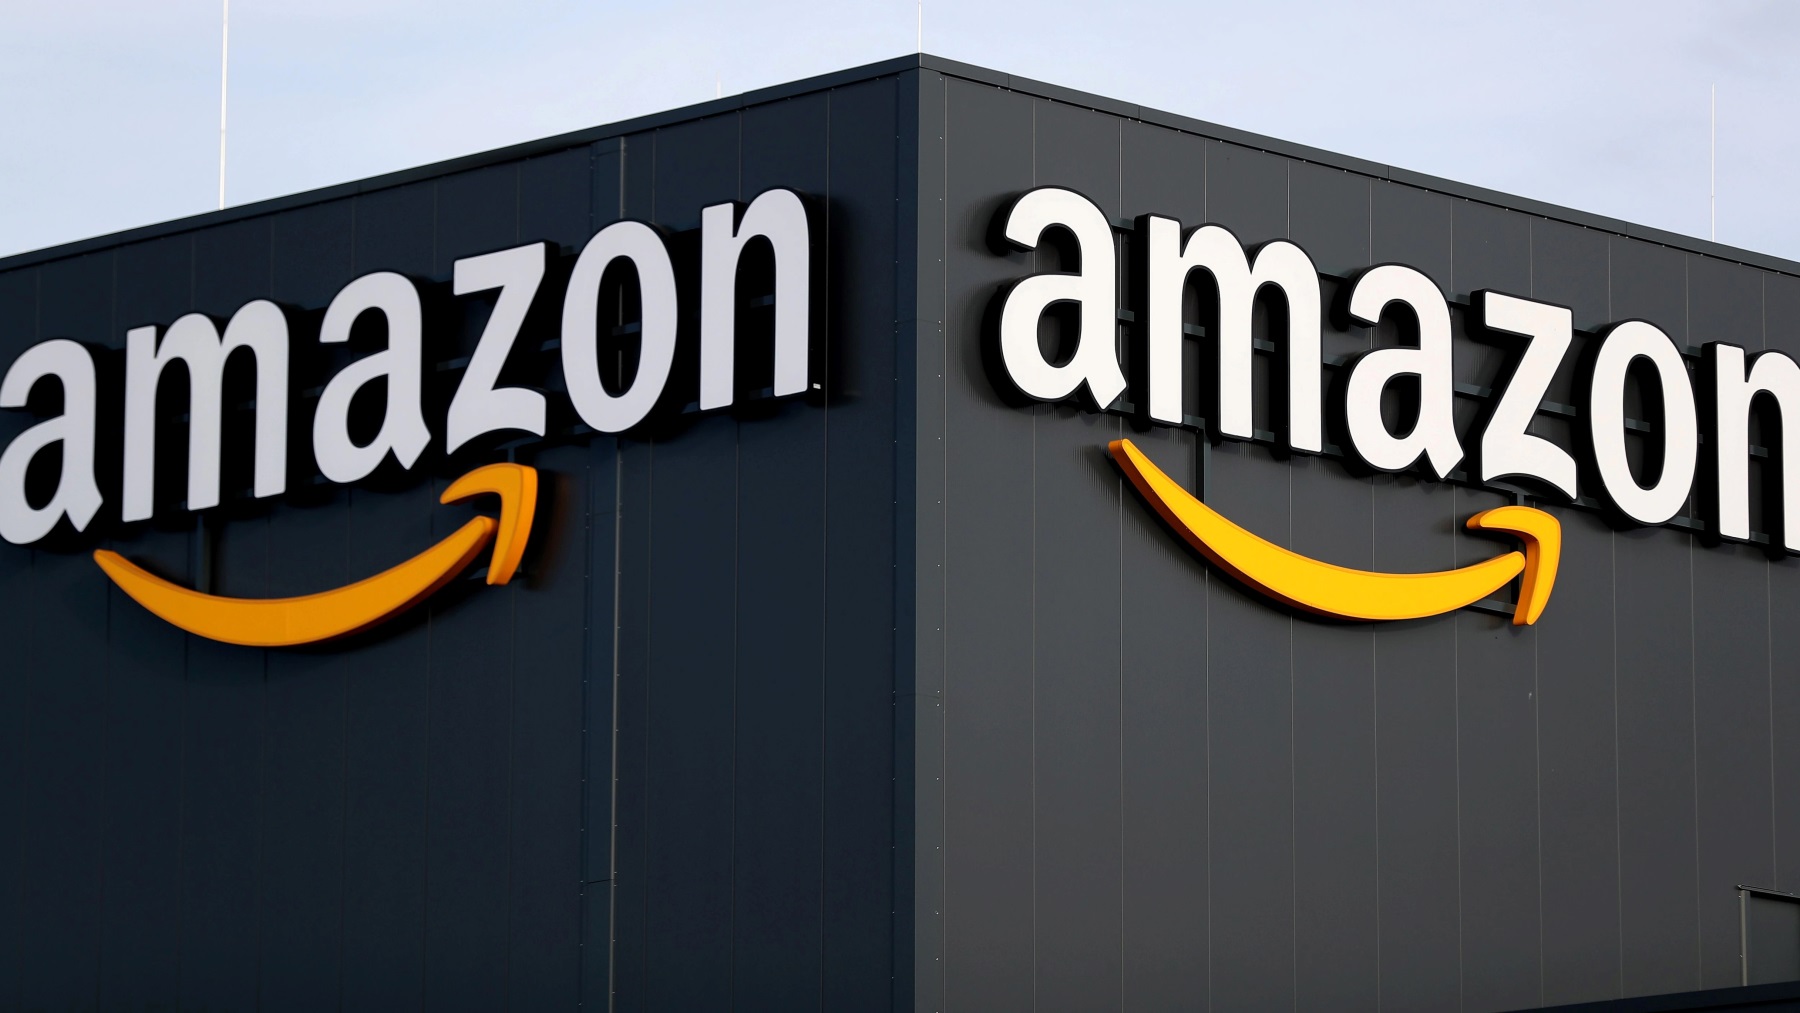 Amazon plans to offer a free telephone service to its ‘prime’ customers in the US